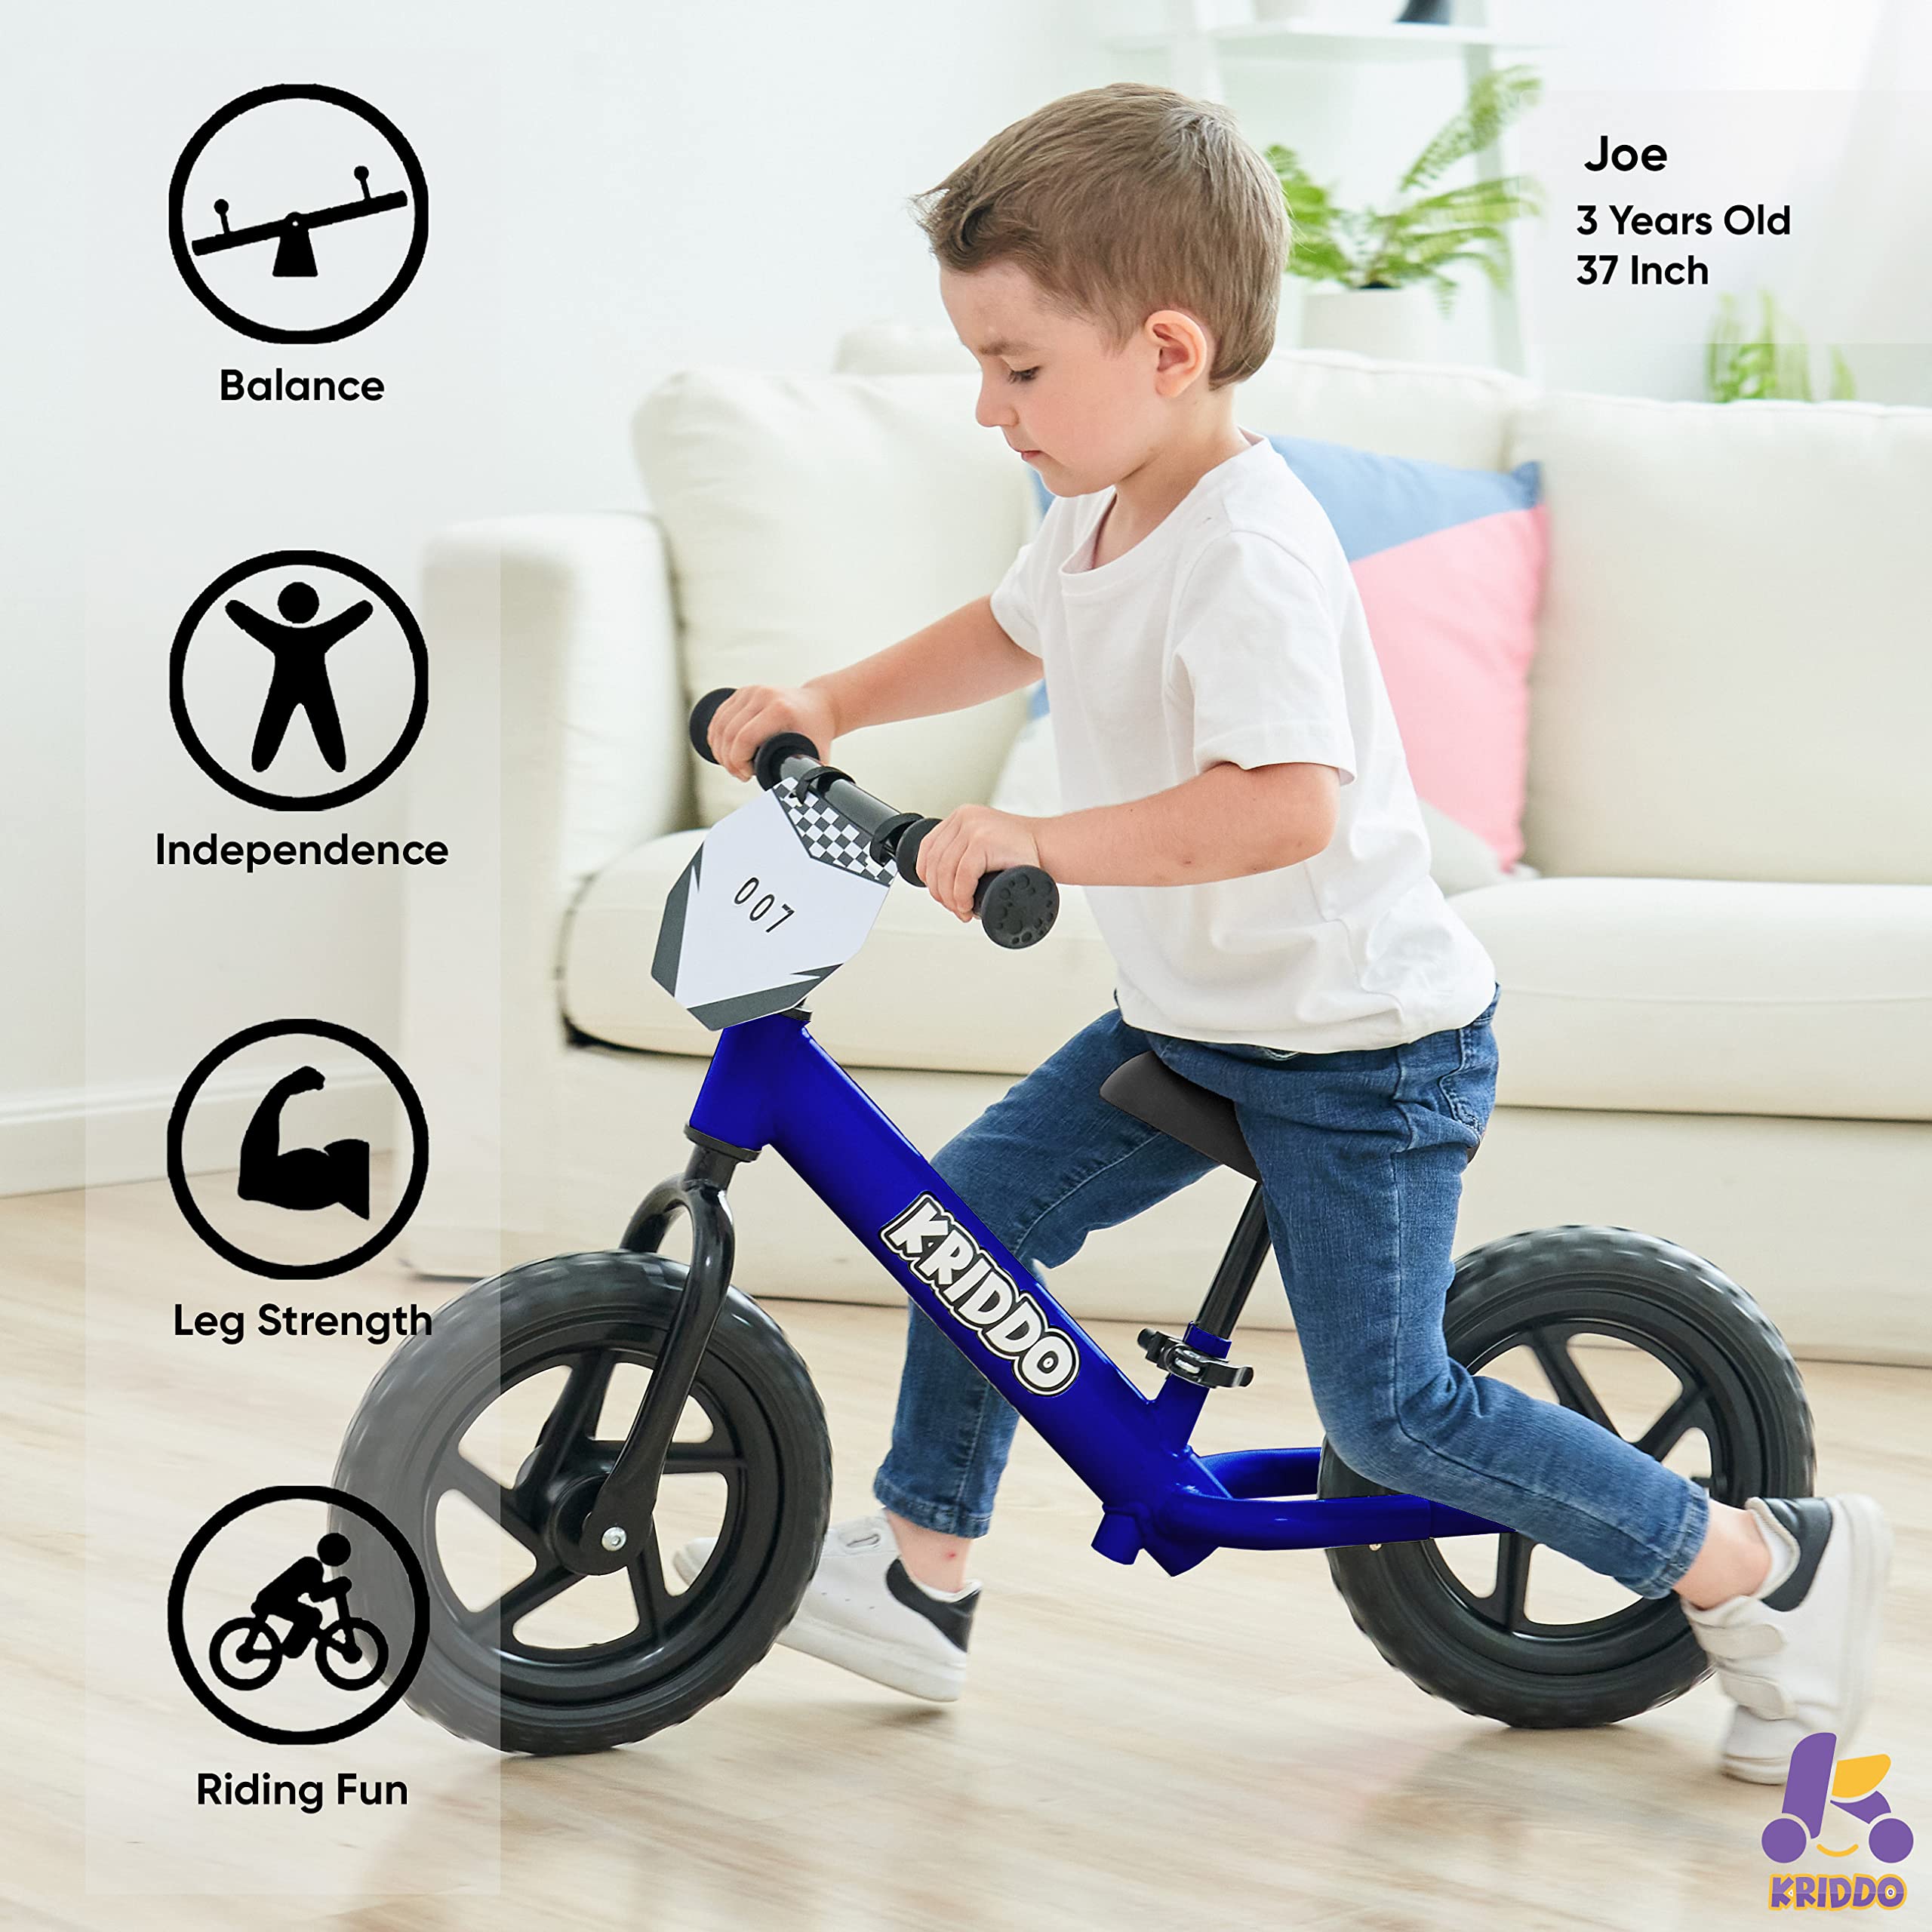 KRIDDO Toddler Balance Bike 2 Year Old, Age 18 Months to 5 Years Old, 12 Inch Push Bicycle with Customize Plate (3 Sets of Stickers Included), Steady Balancing, Gift Bike for 2-3 Boys Girls, Blue